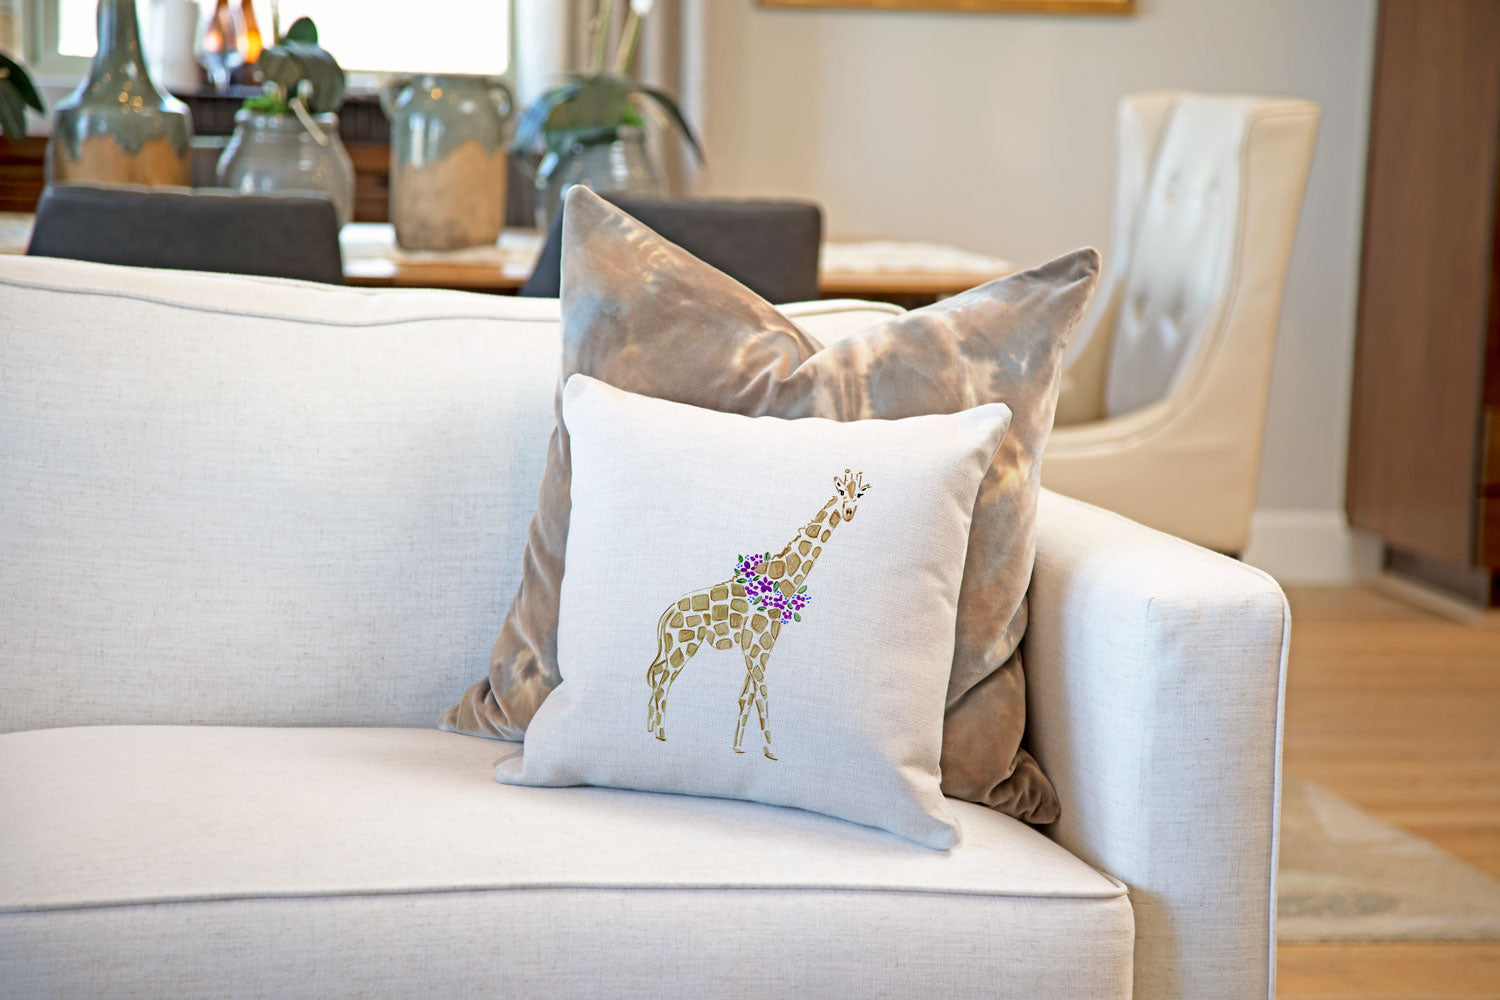 Gina Giraffe Throw Pillow Cover - Animal Illustrations Throw Pillow Cover Collection-Di Lewis